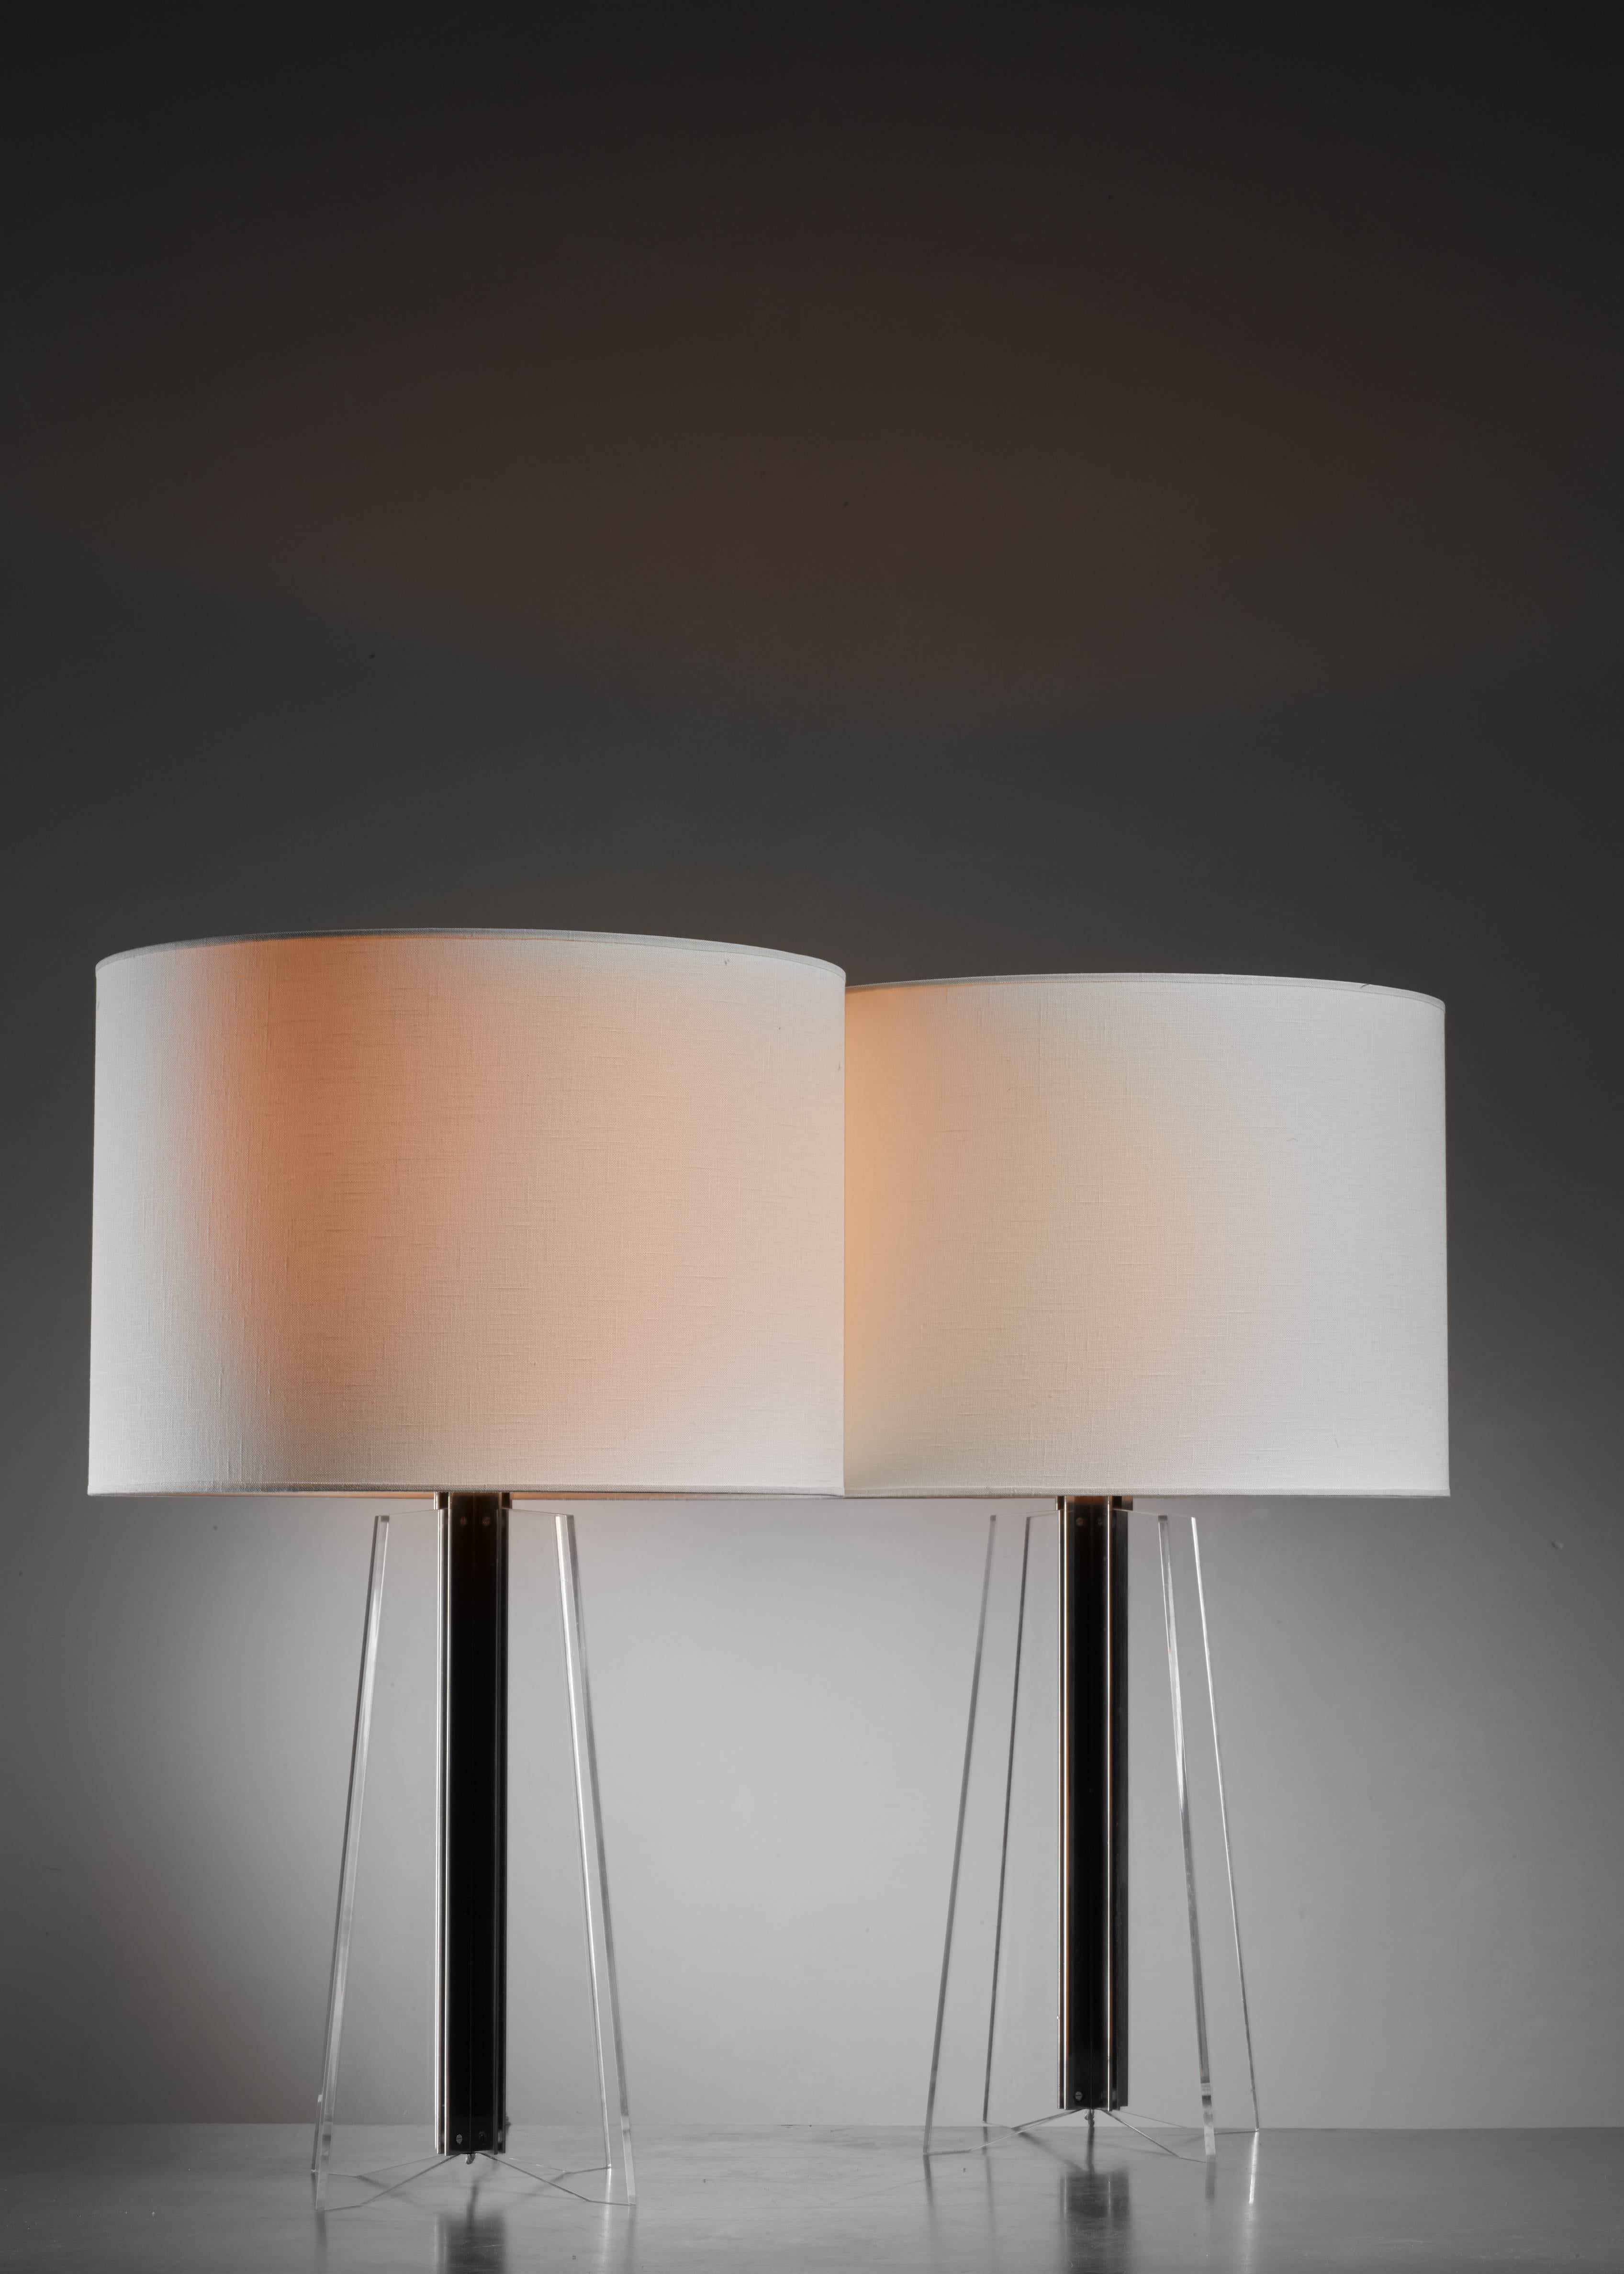 A pair of German midcentury table lamps on a cruciform plexiglass base with a metal core. The measurements stated are of the lamps without a shade.
